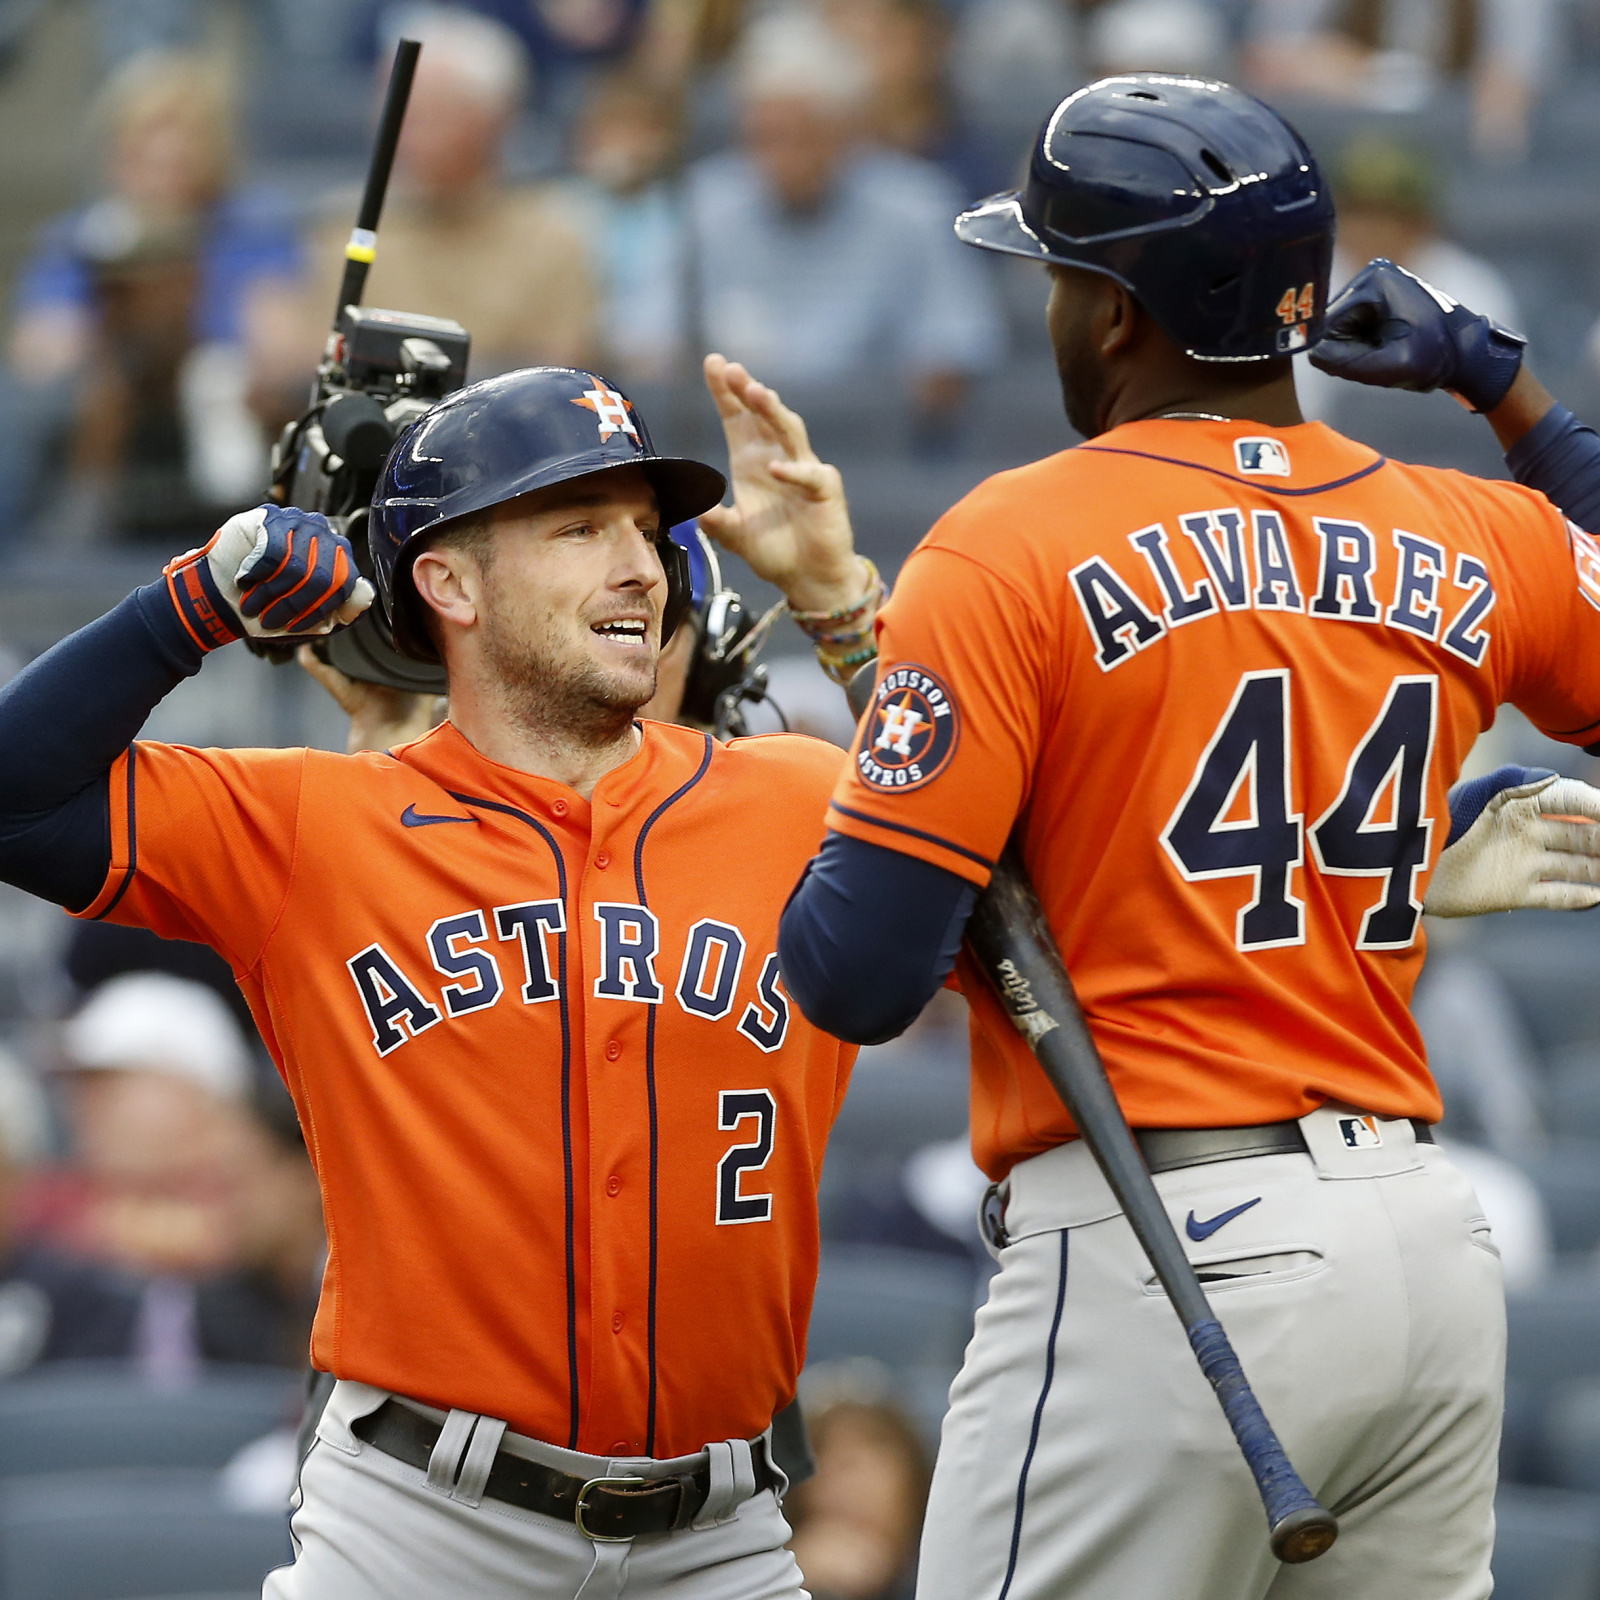 Report: Rival officials surprised by Astros players' lack of